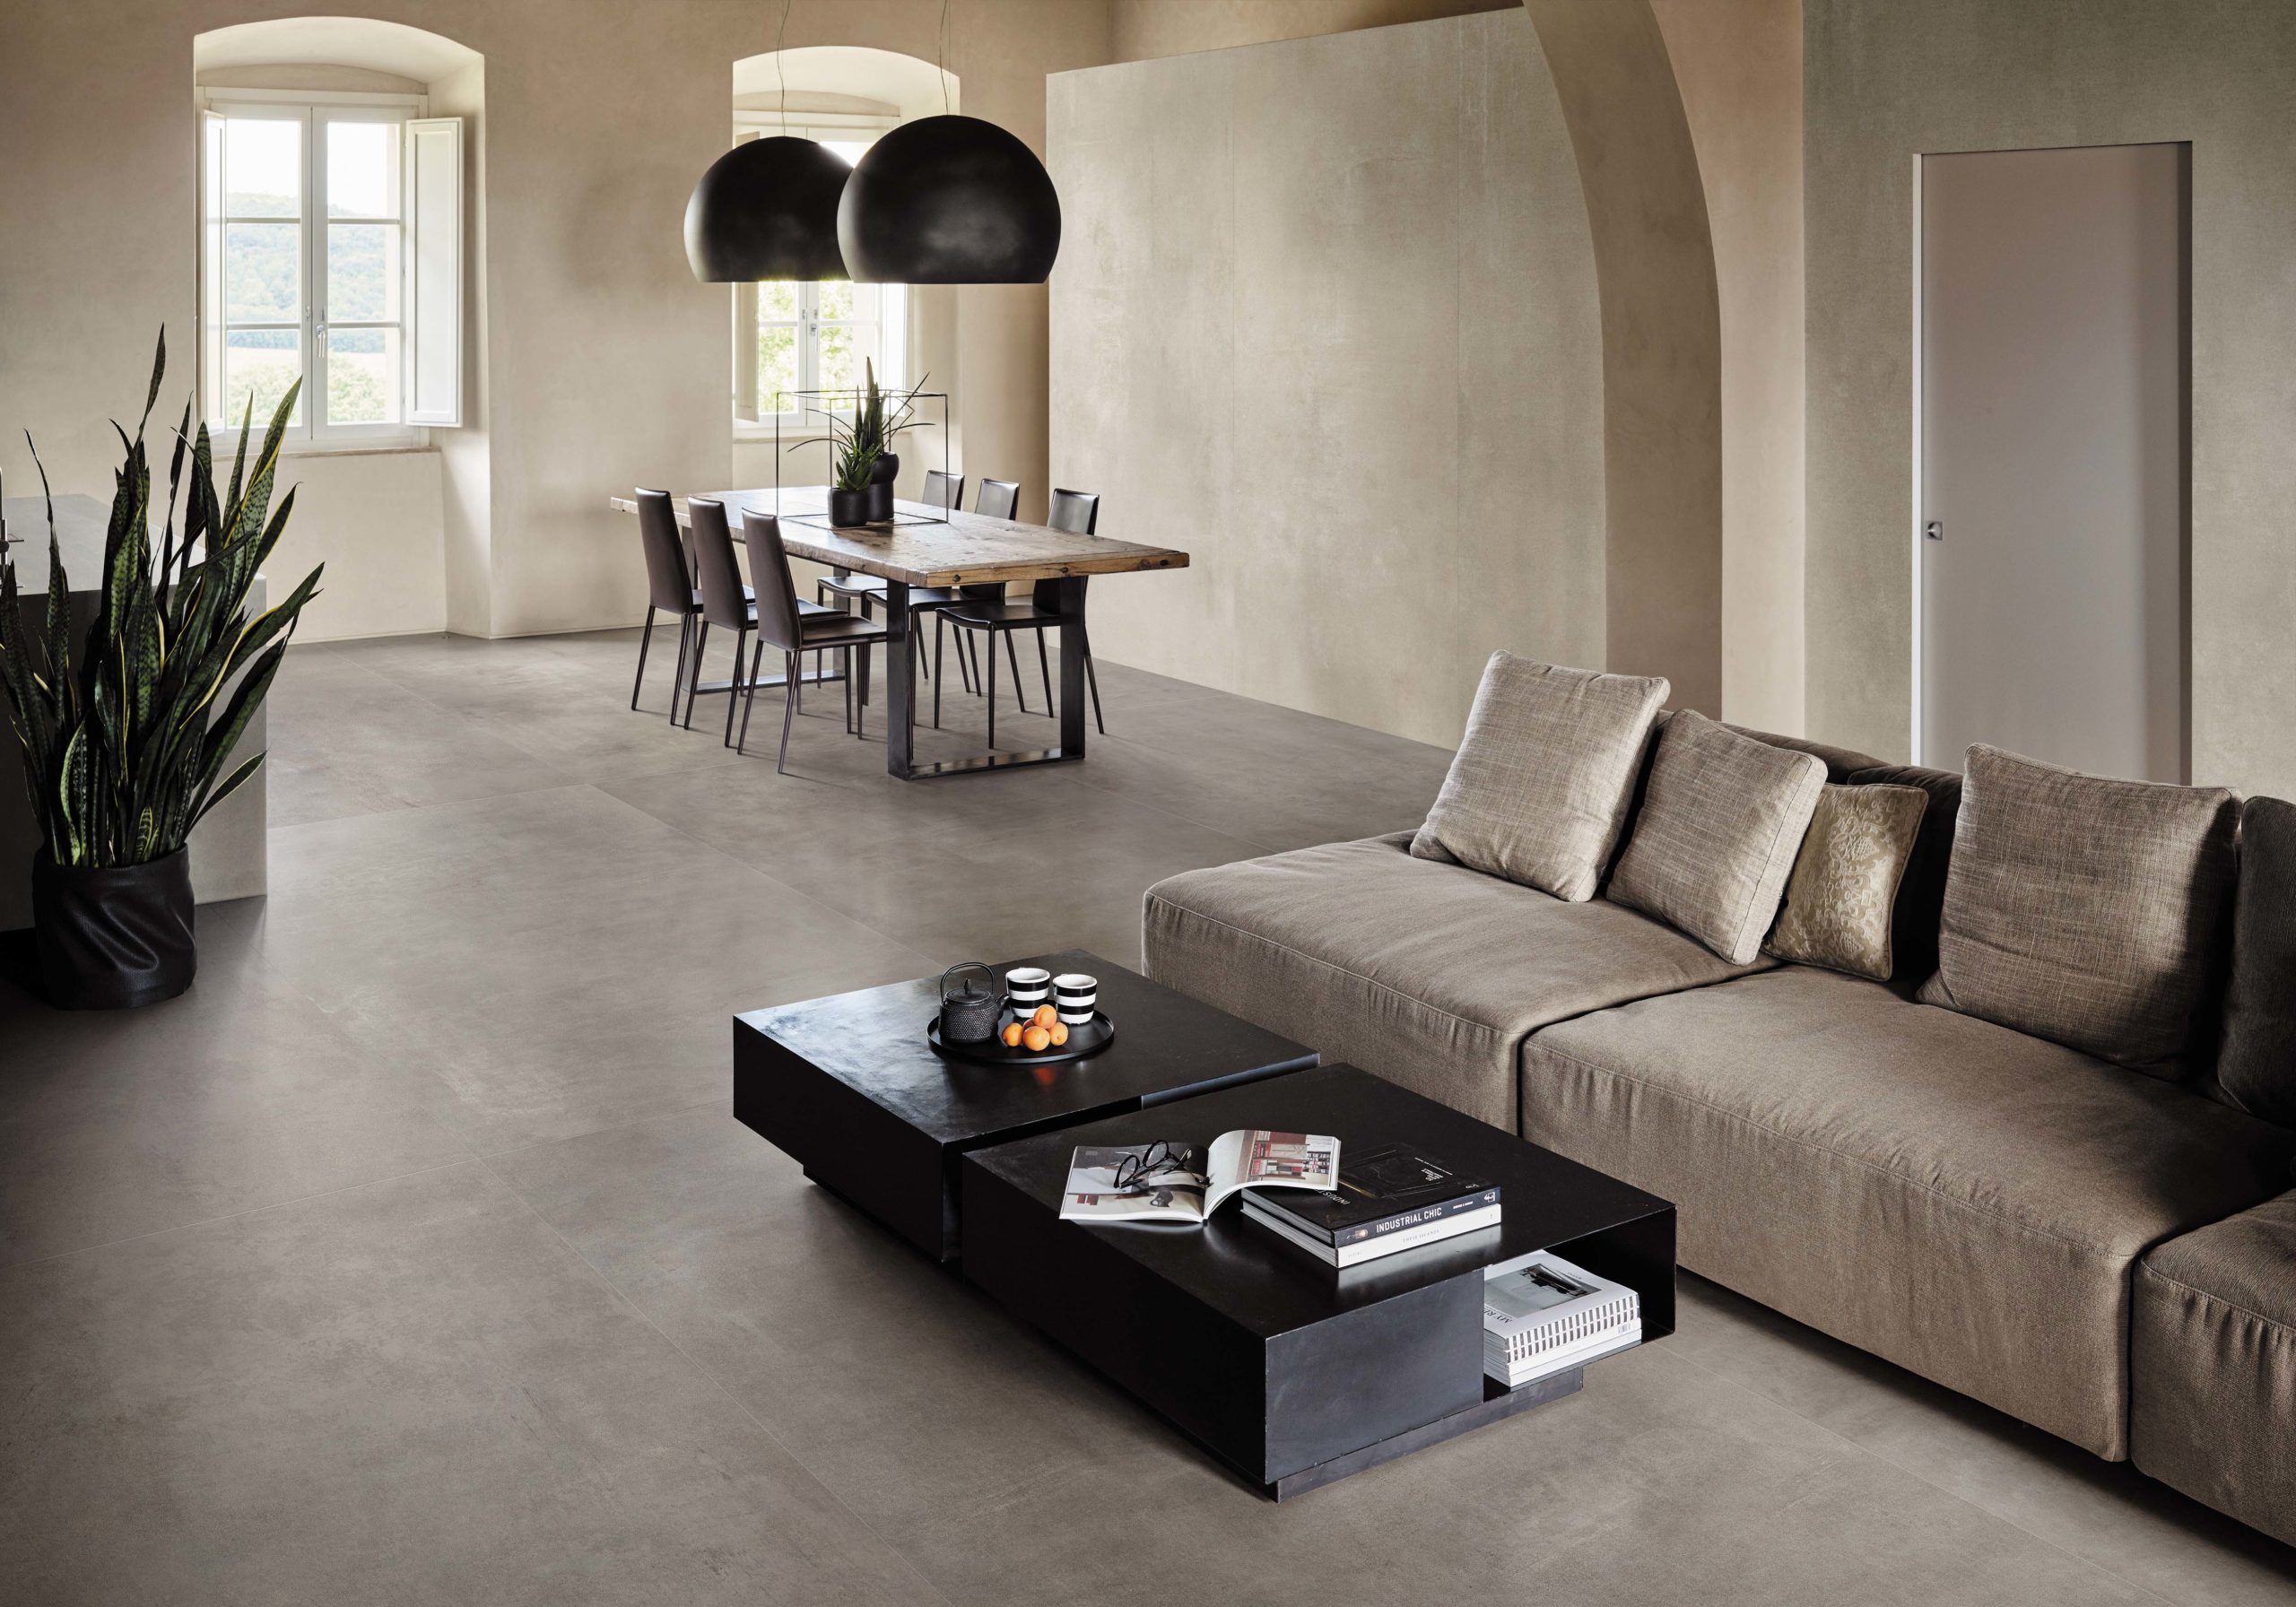 Boost porcelain tile in grey and white installed on the floor in a living area.